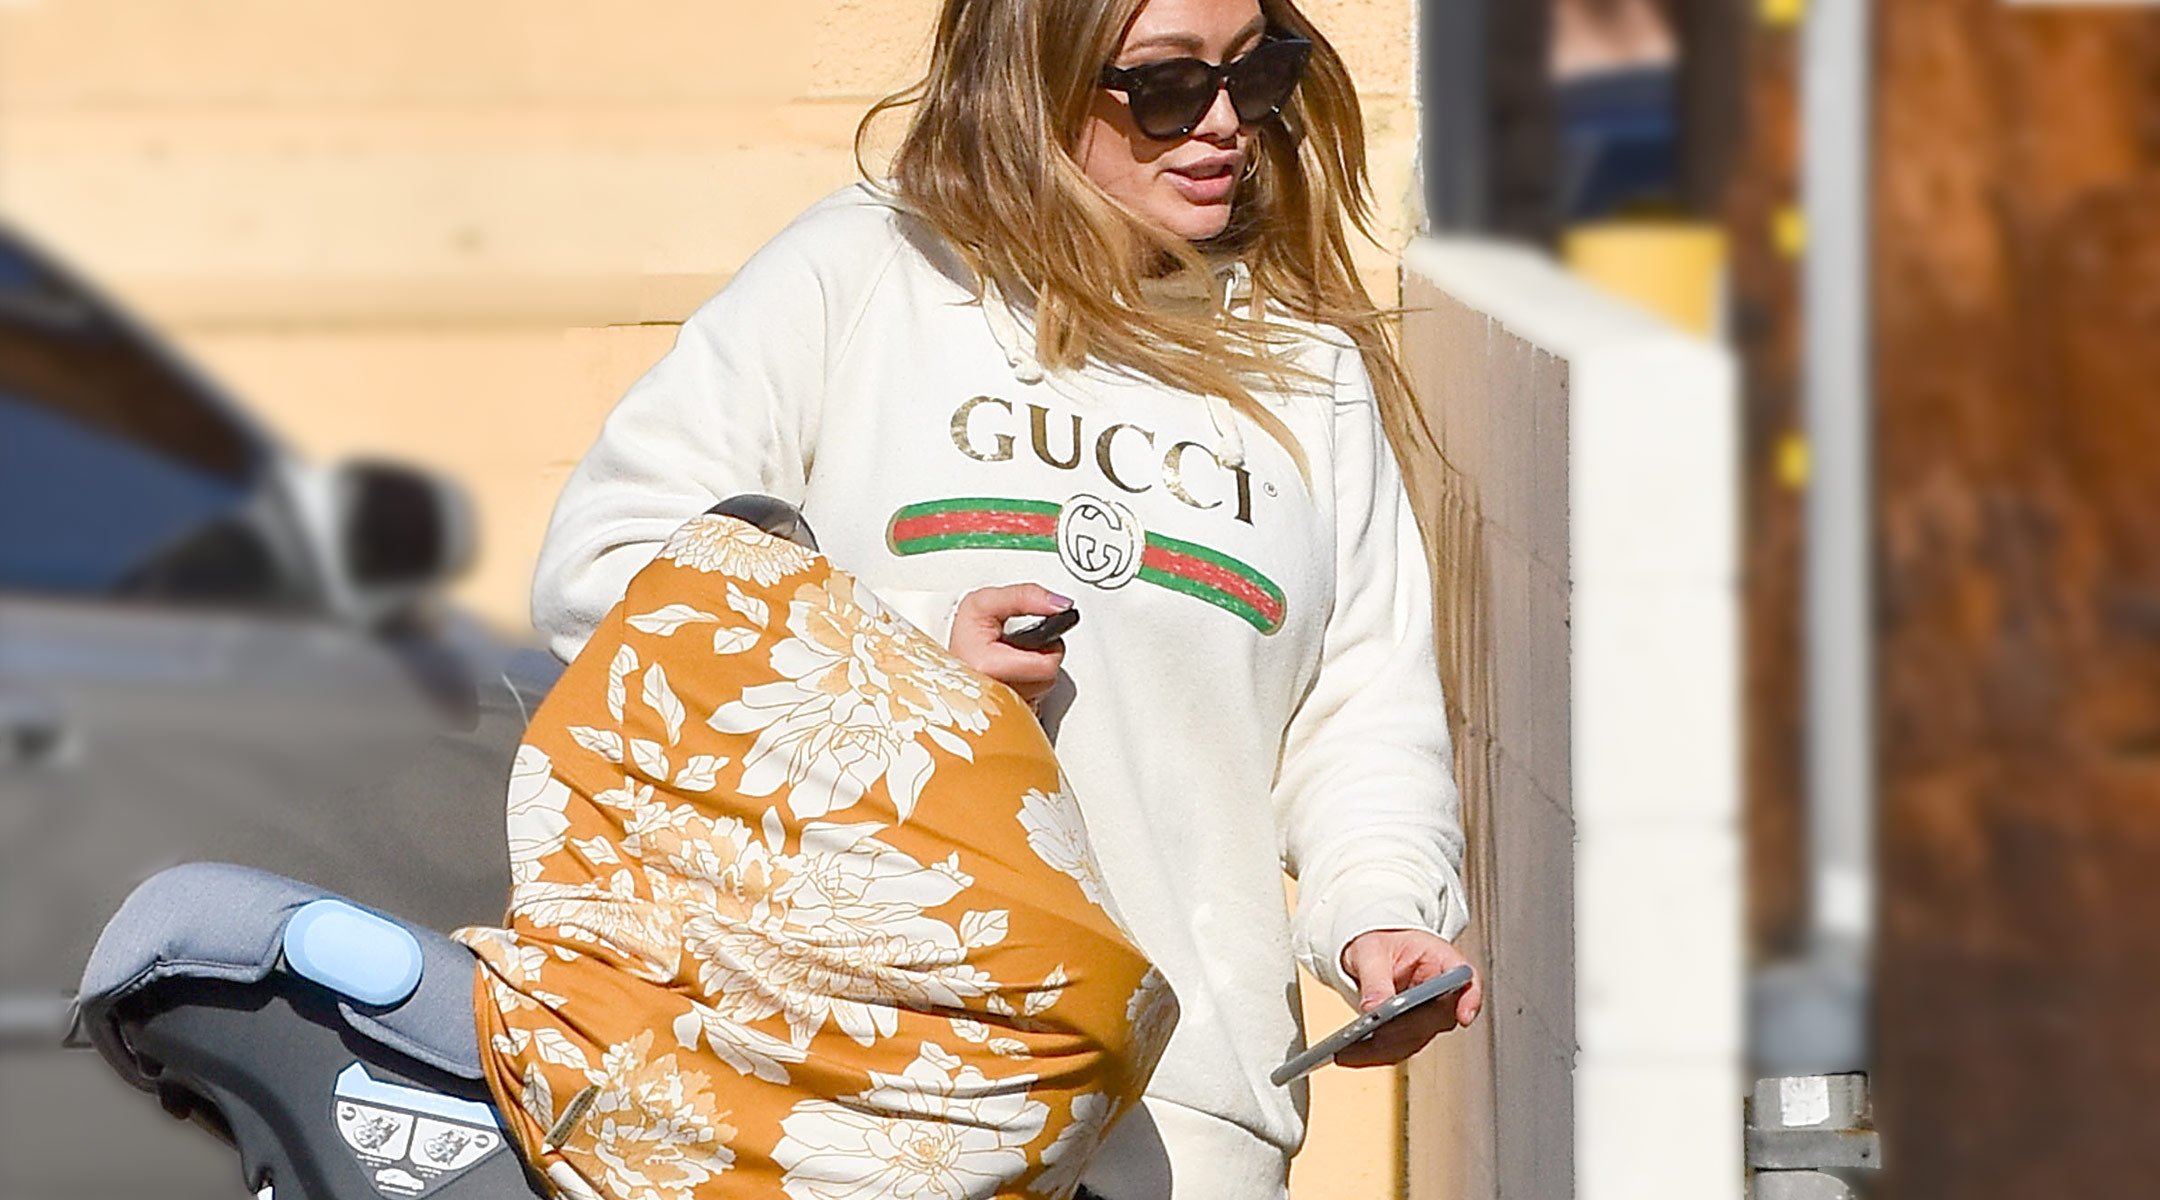 hilary duff commensurates about her baby that has colic